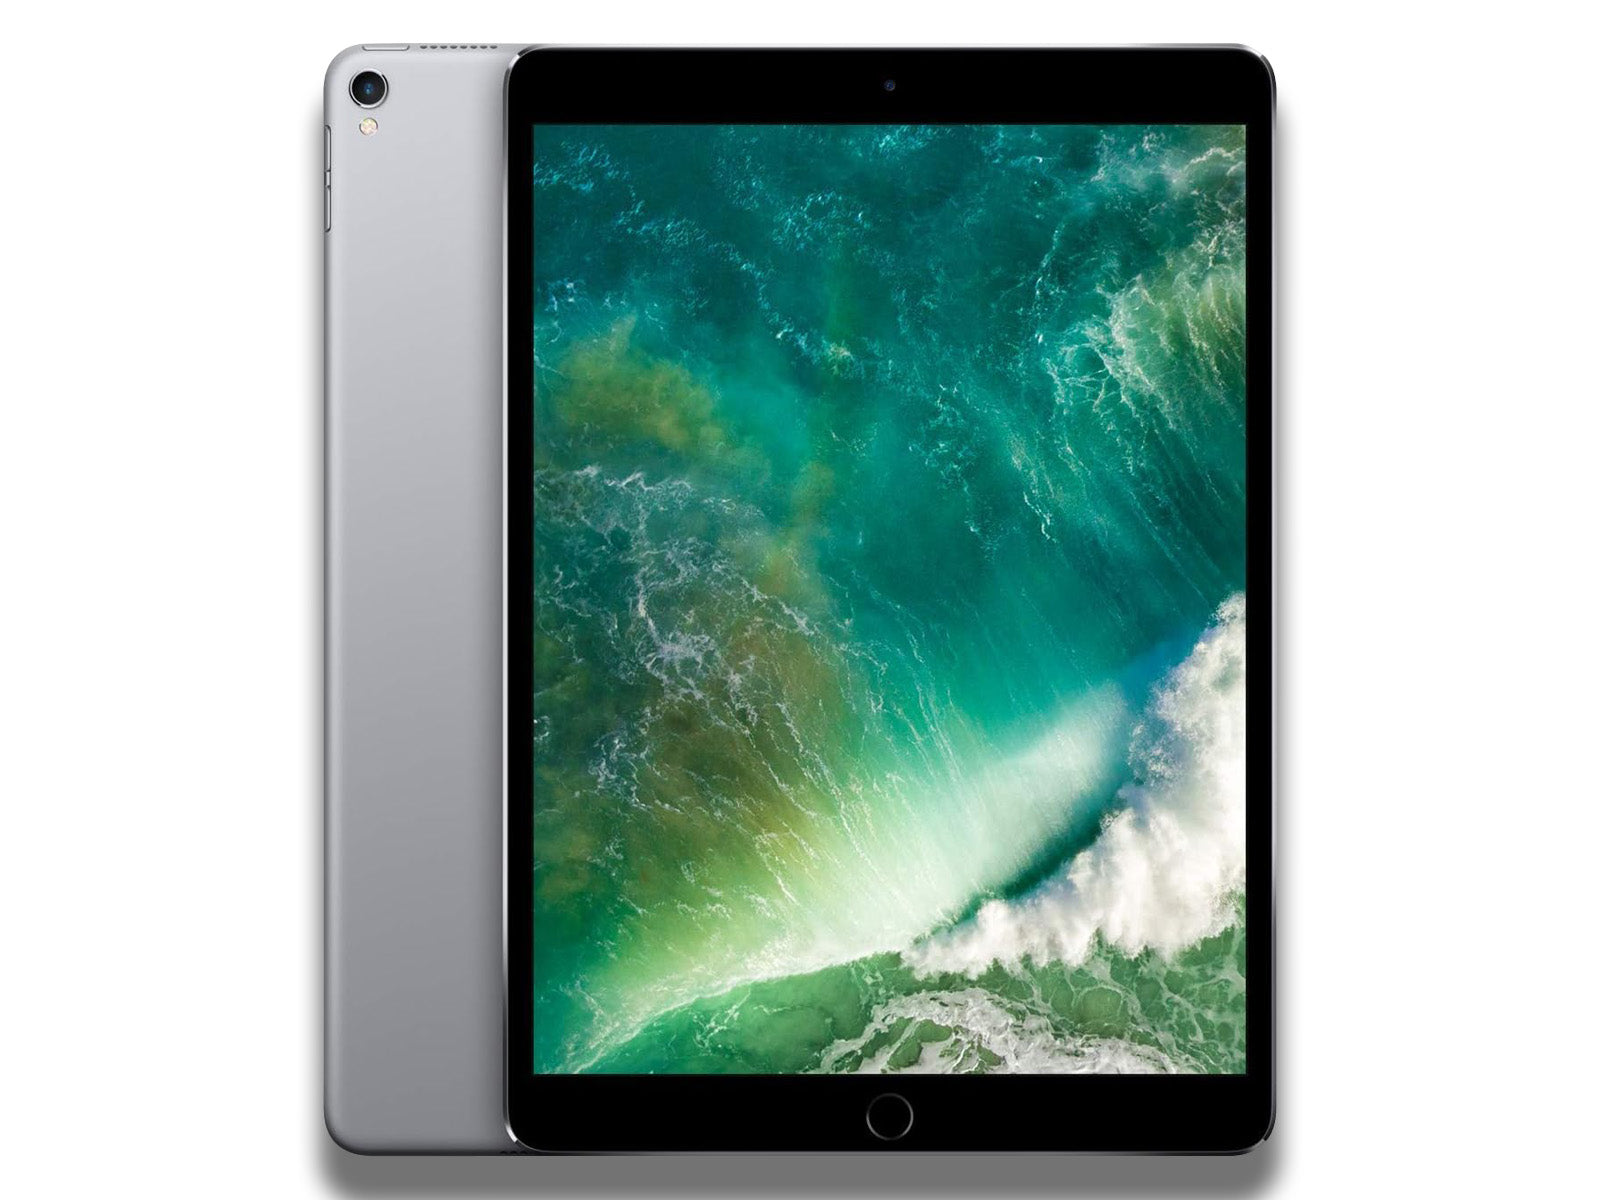 Image shows a front and back view of the space grey Apple iPad Pro 12.9-inch 2nd Generation